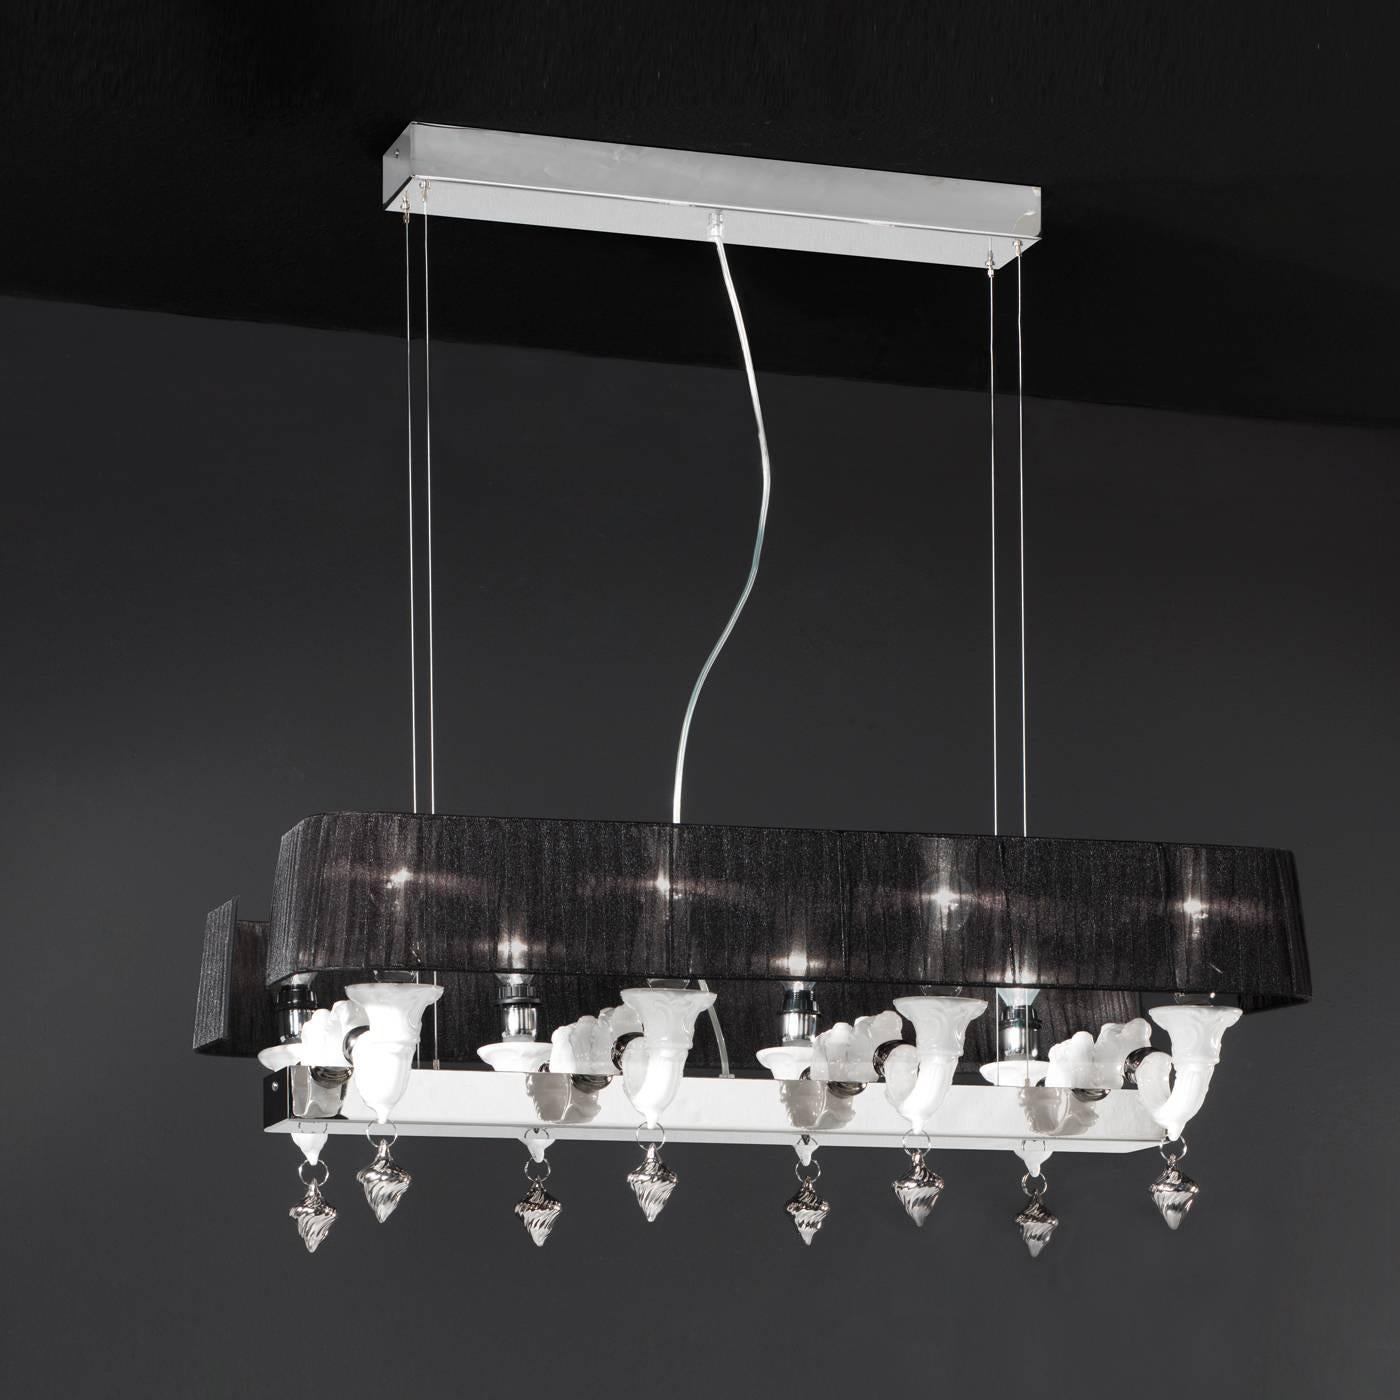 This handmade ceramic chandelier features both modern and Classic elements making it ideal to elevate any environment in which it is placed. The refined and Minimalist shape of the center element in chrome is complemented by the four contrasting